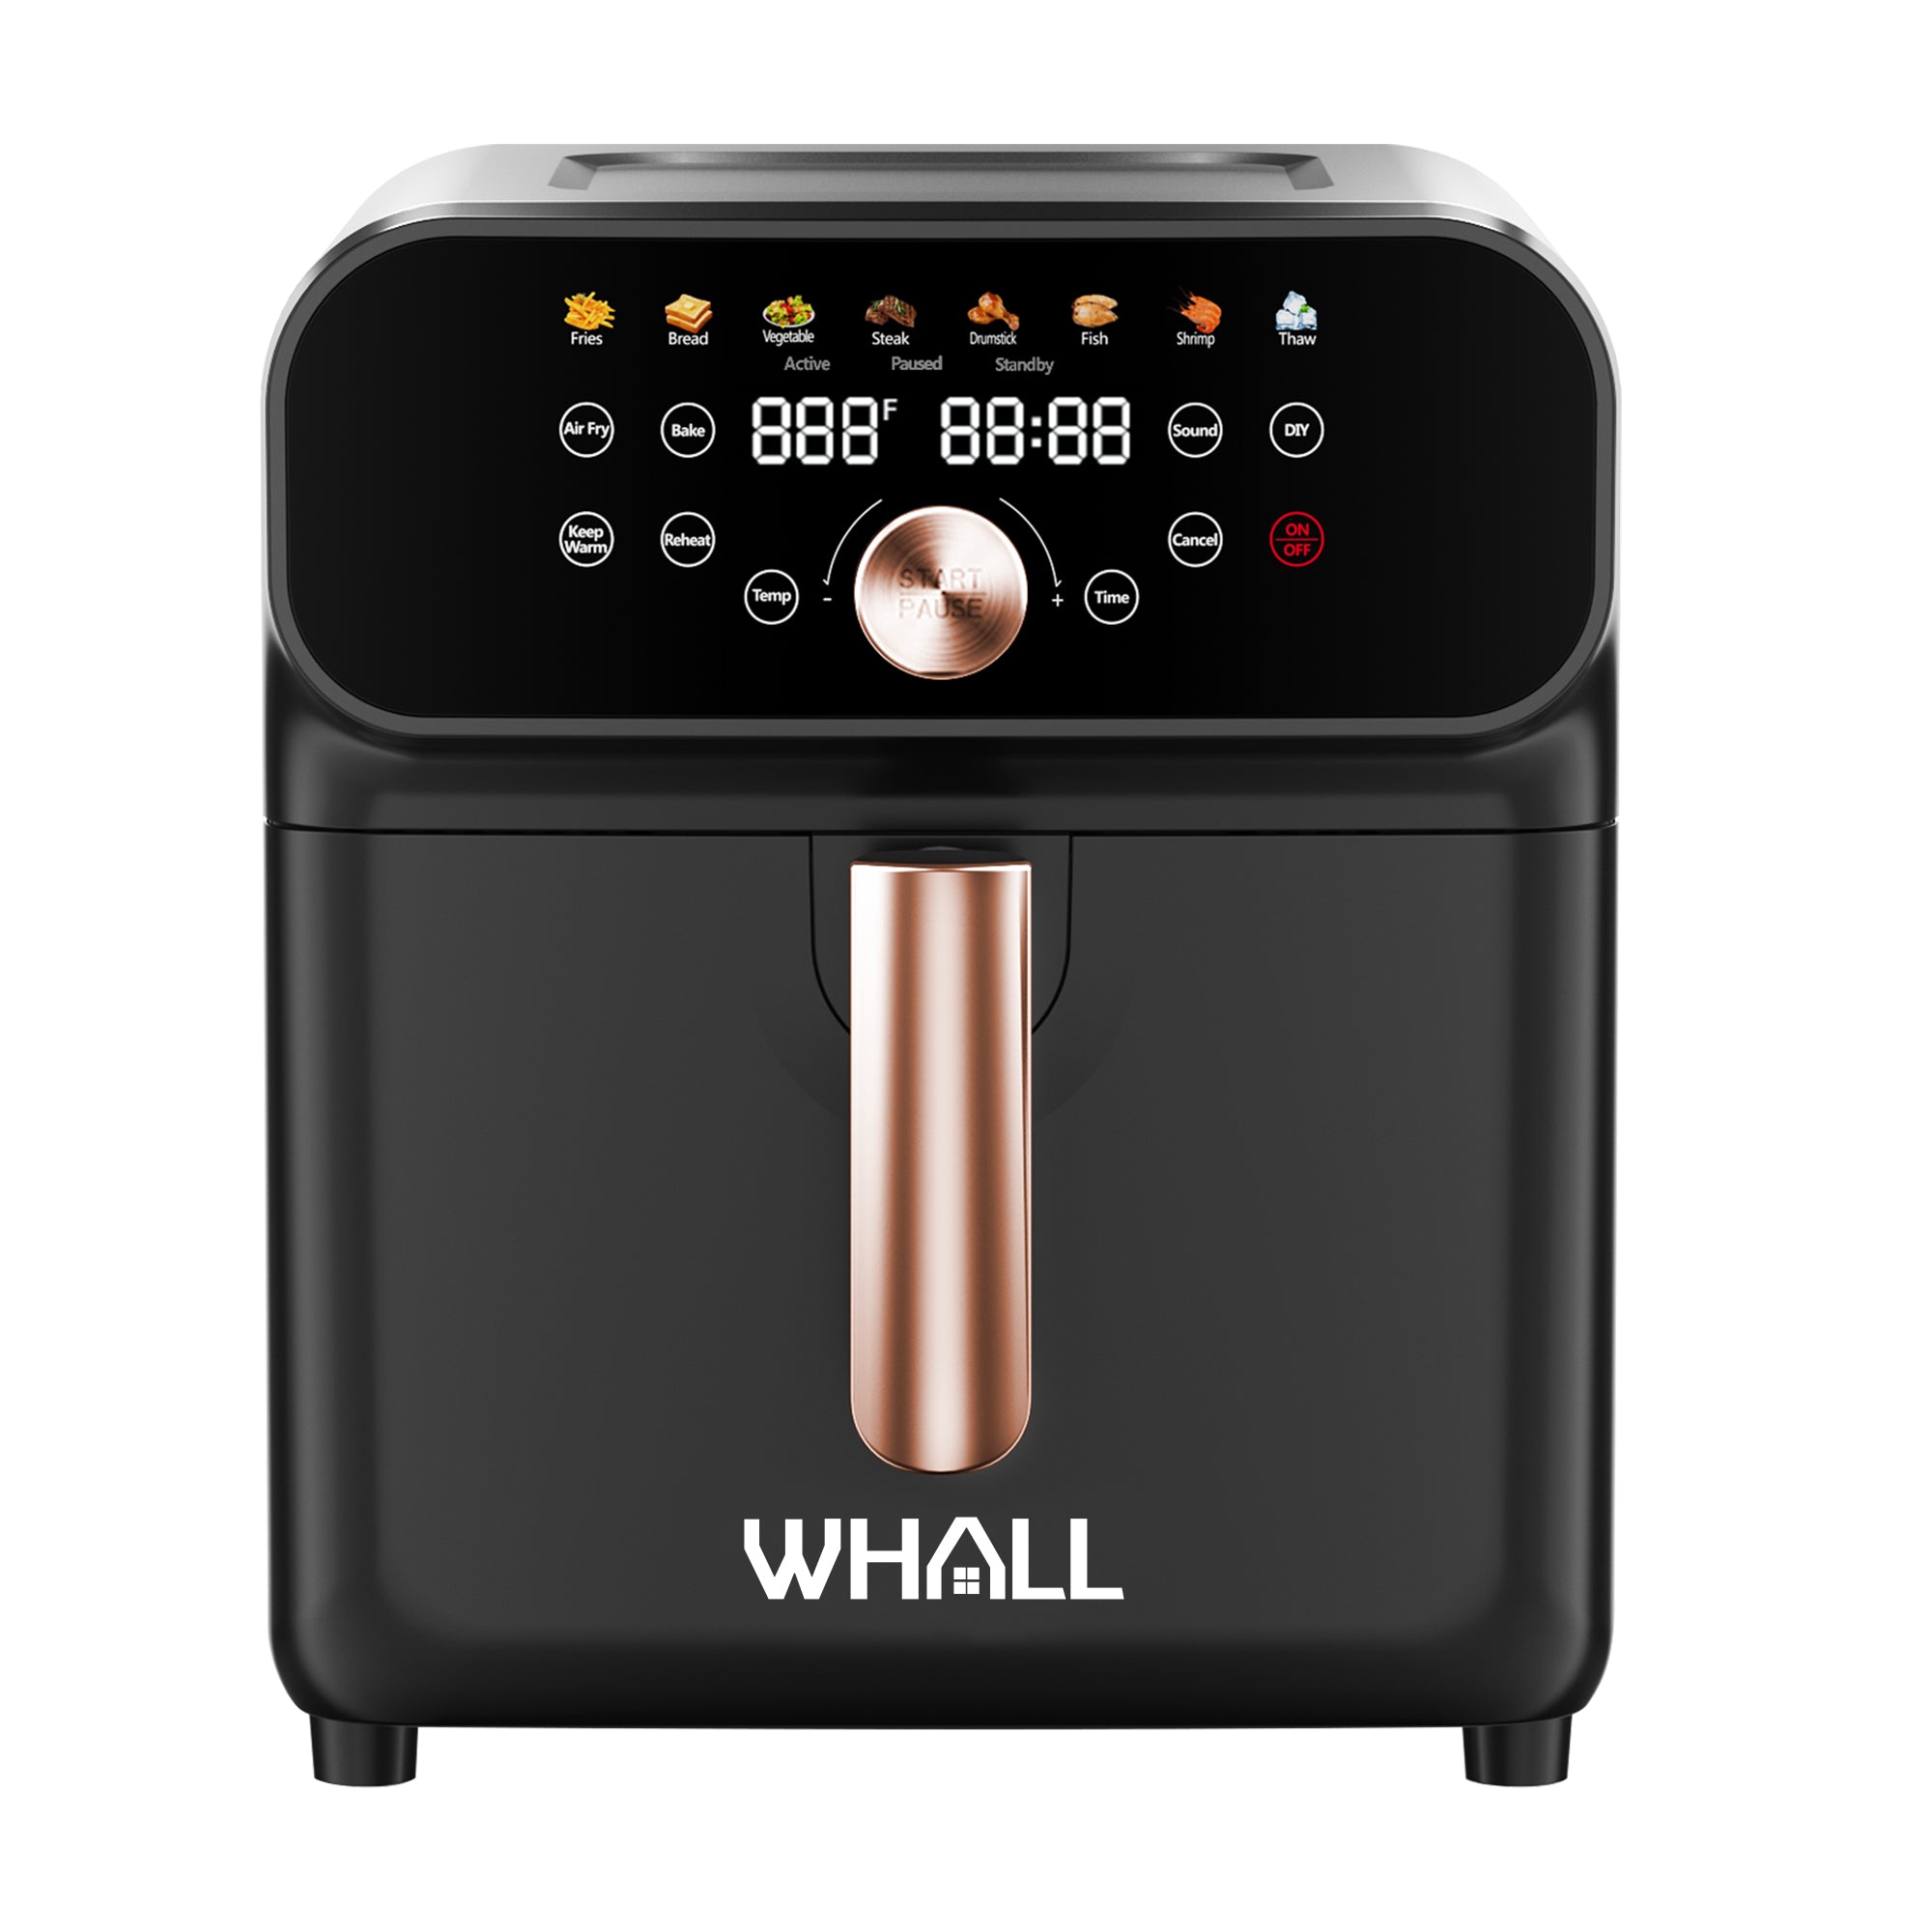 WHALL® 6.2QT Air Fryer Oven, 12-in-1 Cooking Functions, Stainless Steel